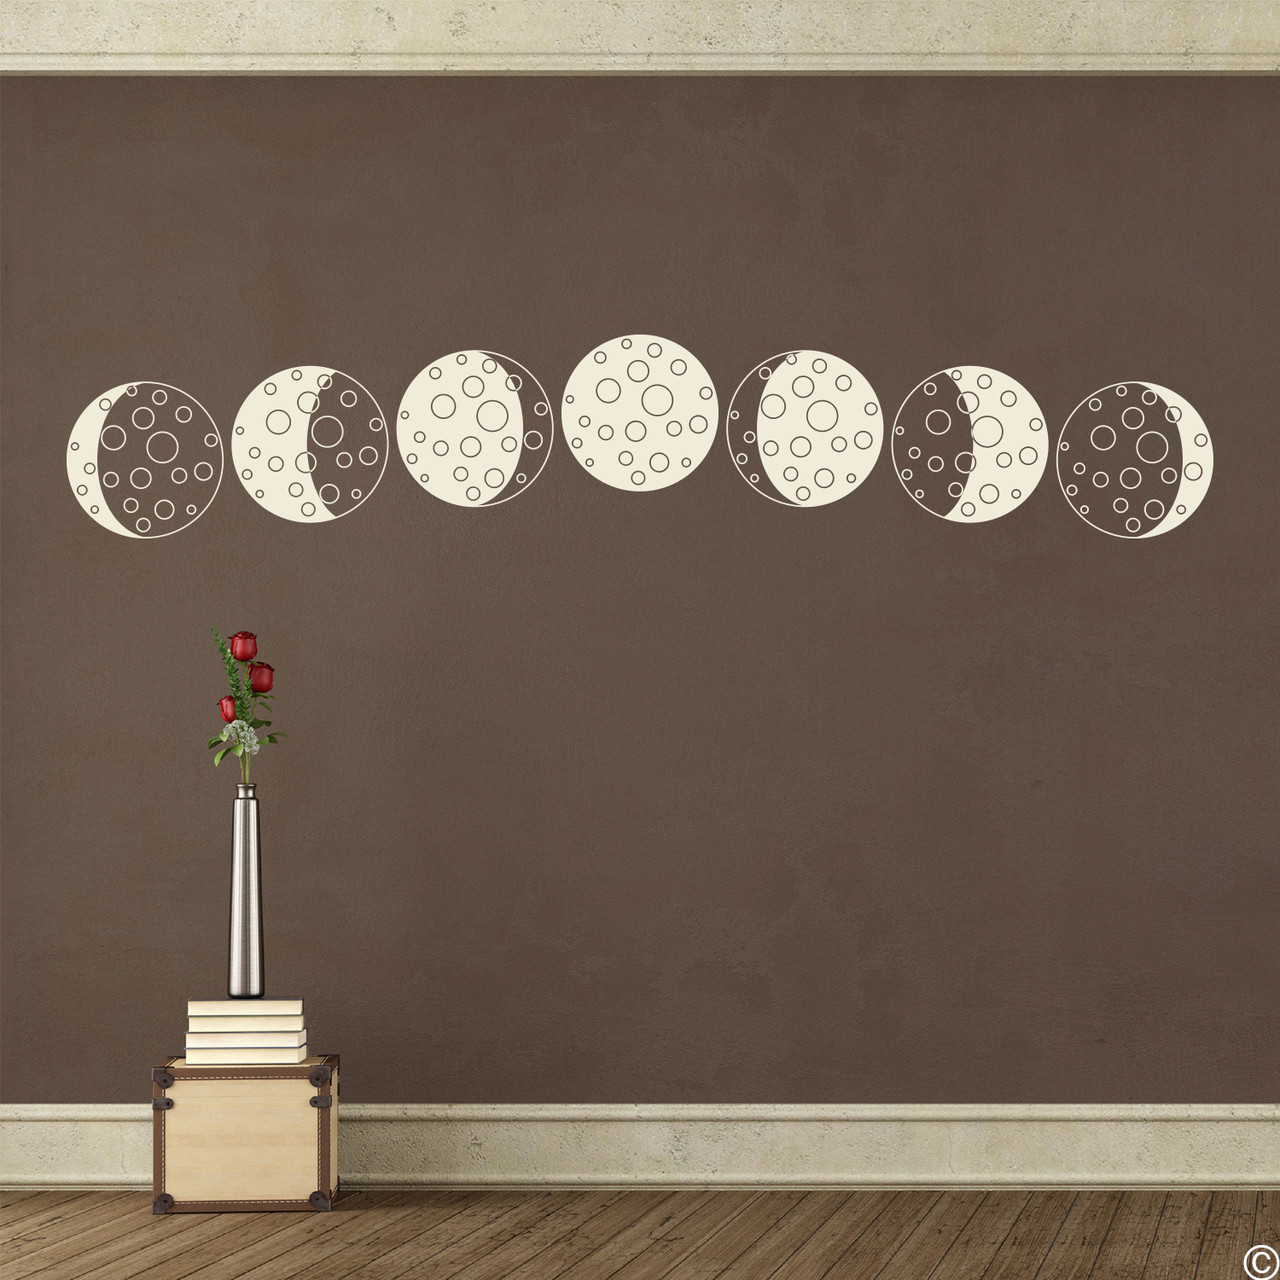 Phases of the Cartoon Moon vinyl wall decal in TURQUOISE